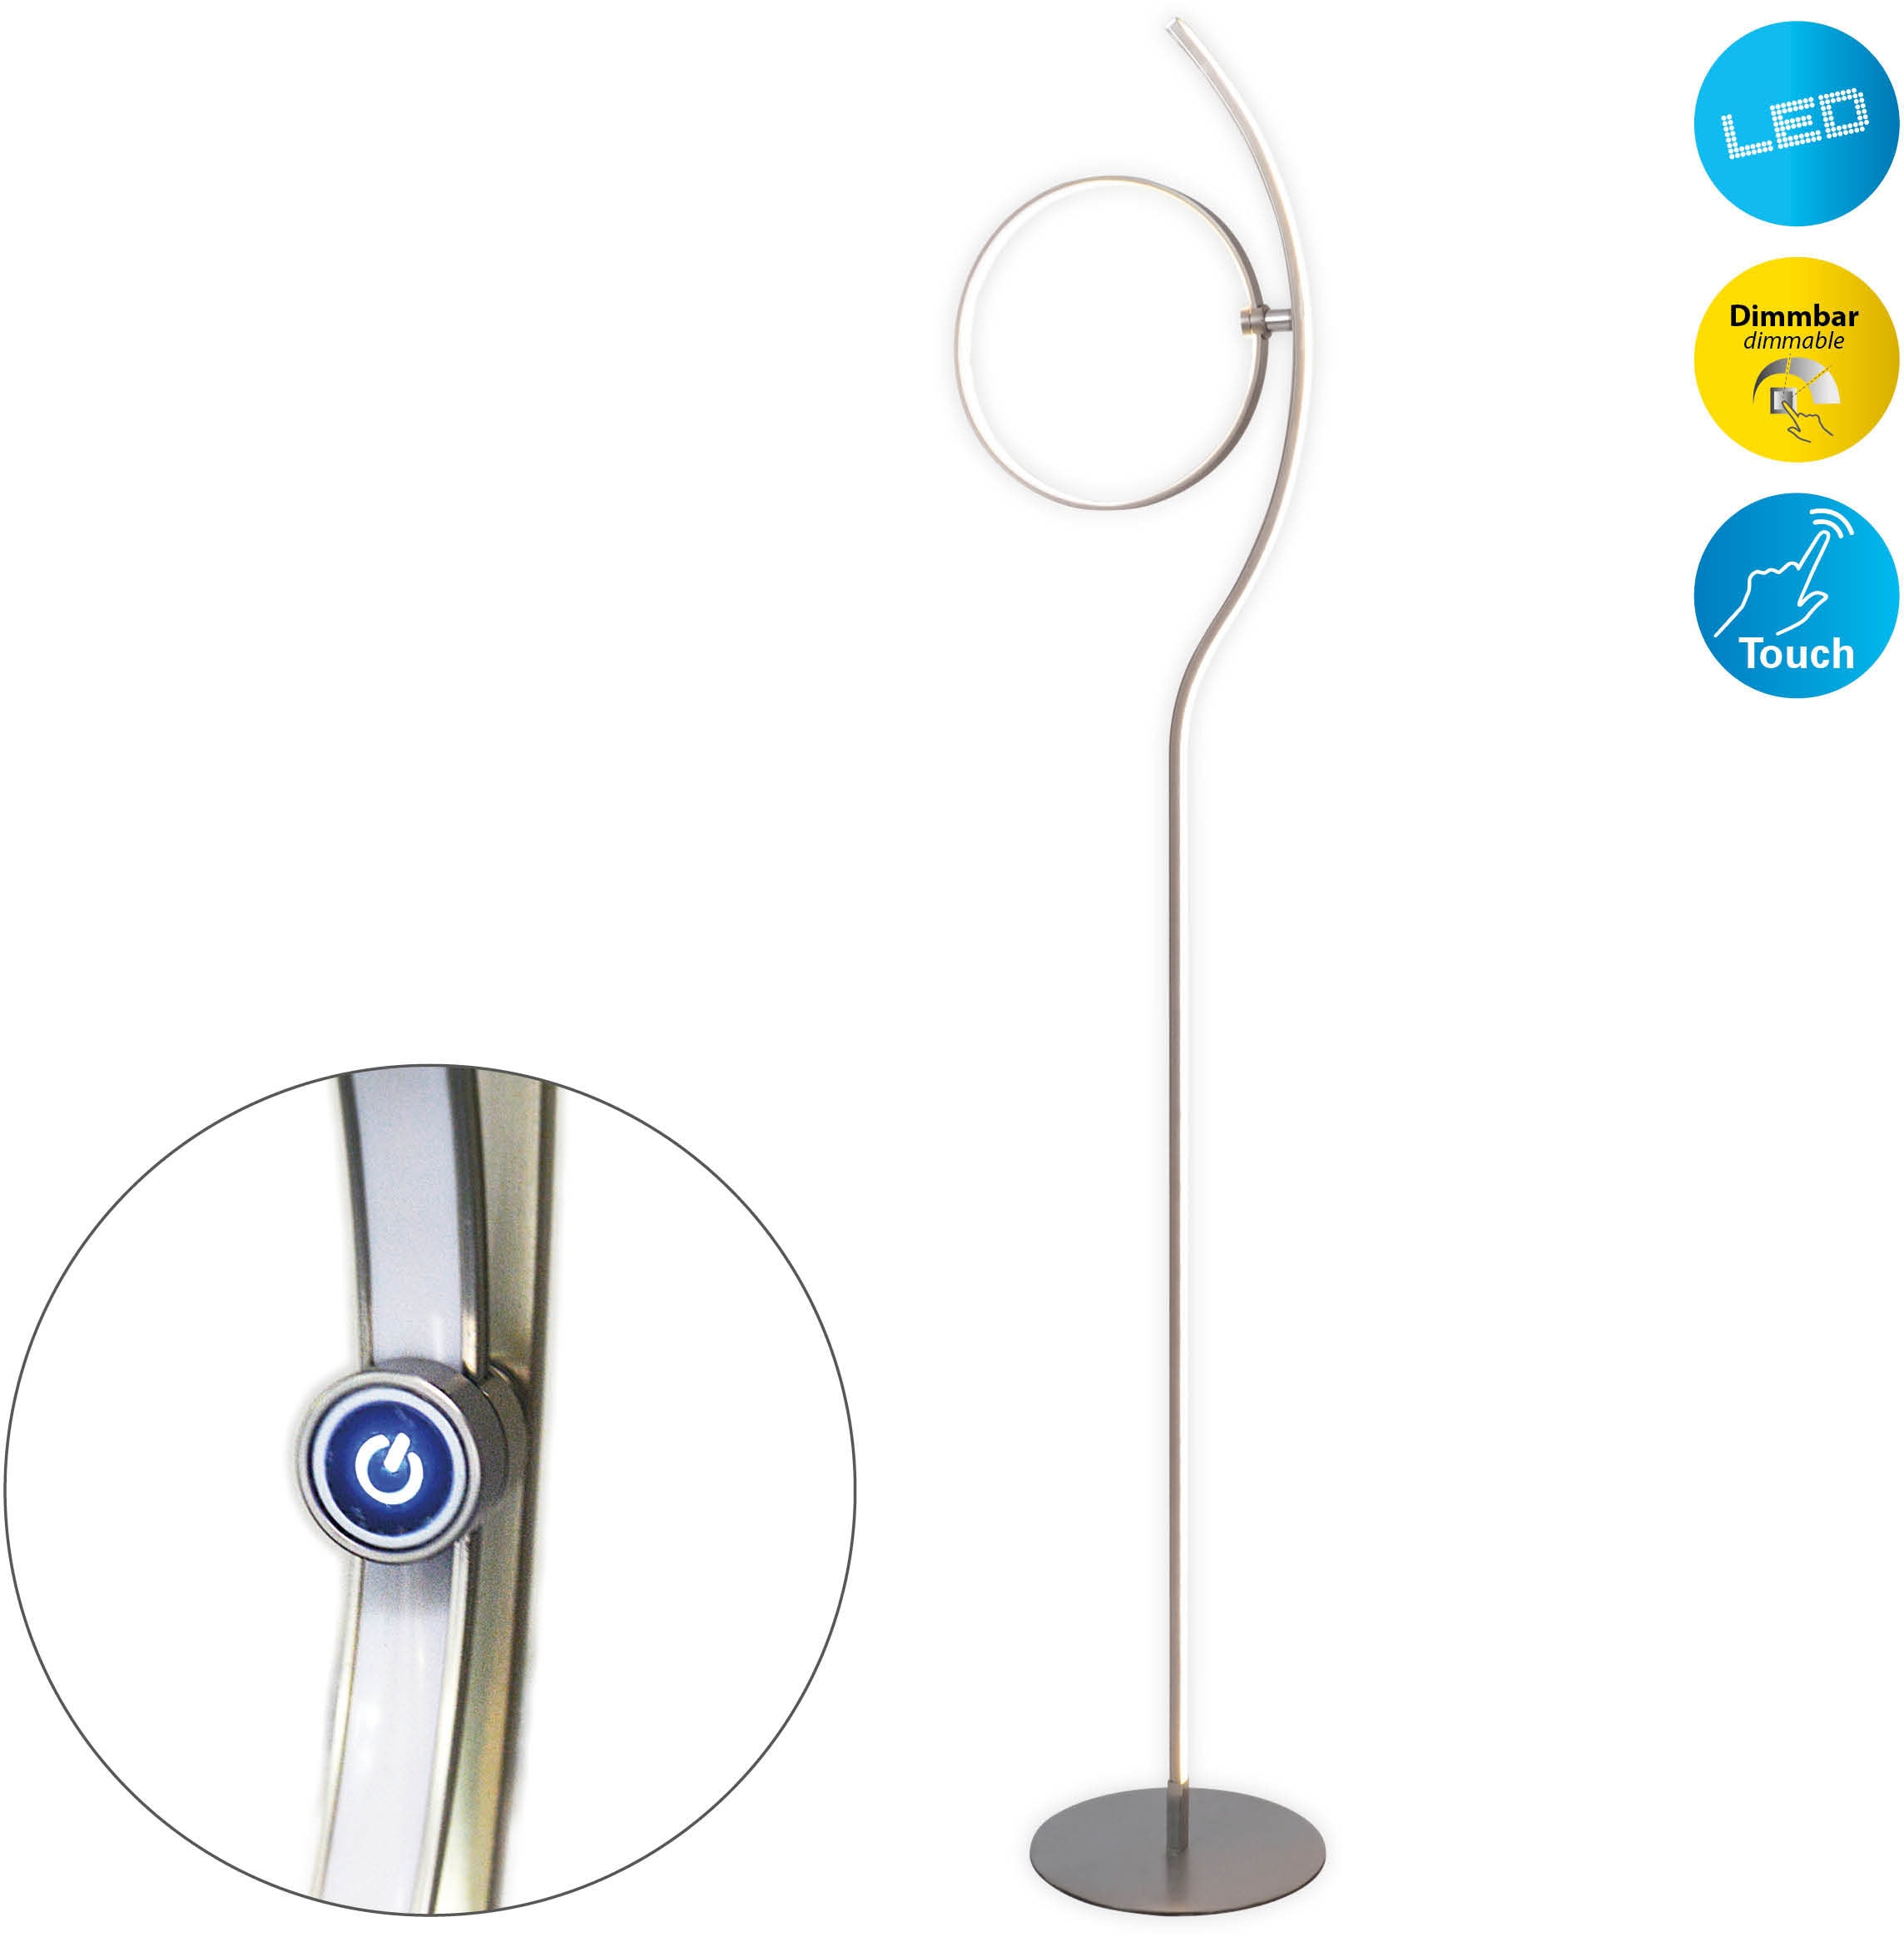 LED Stehlampe »"Loop Line"«, Dimmbar in 3 Stufen per Touch-Dimmer; Inkl. Stecker-Netzteil